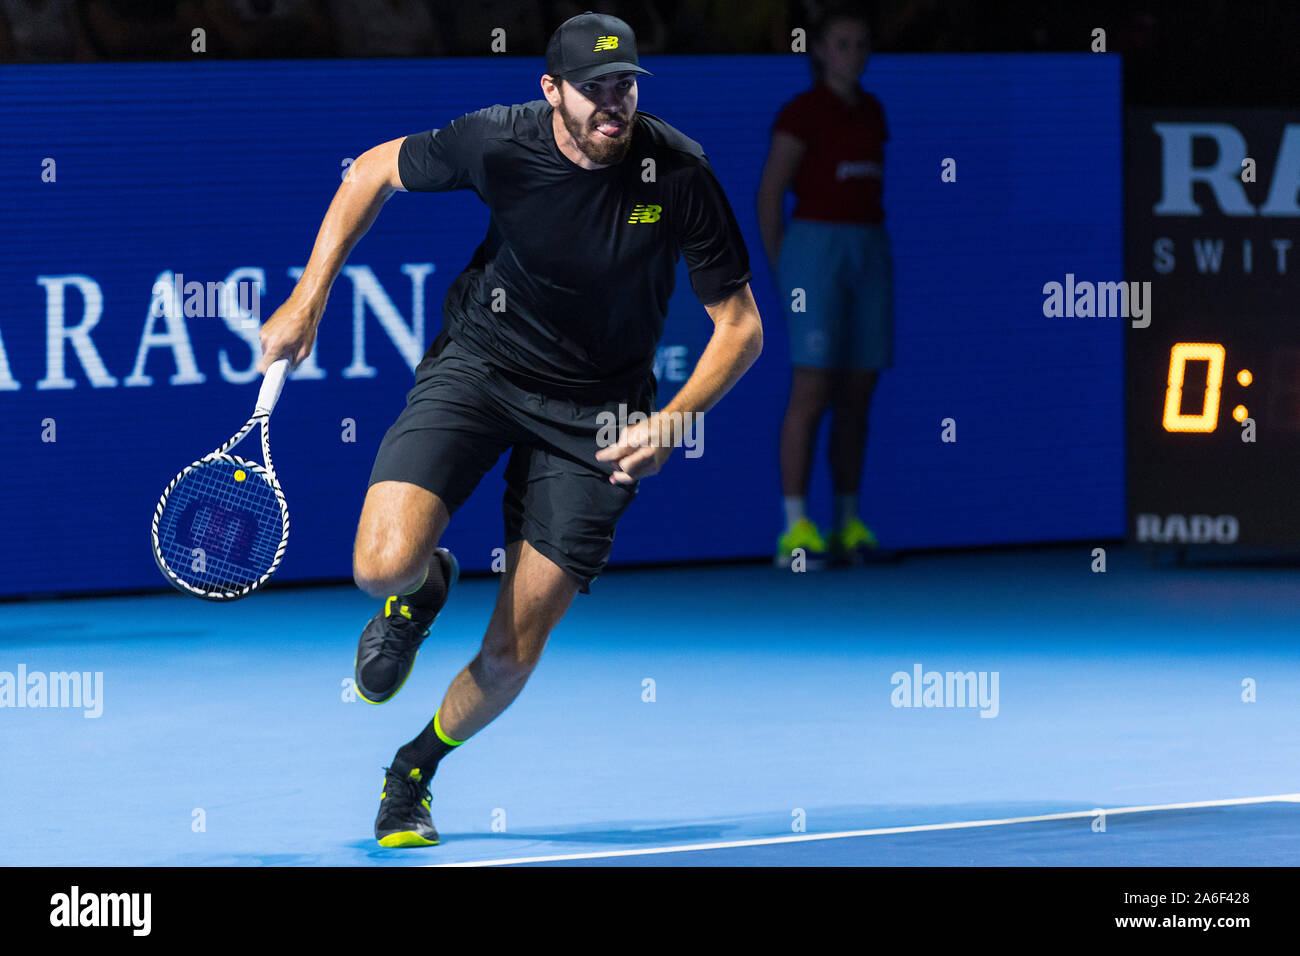 St. Jakobshalle, Basel, Switzerland. 26th Oct, 2019. ATP World Tour Tennis,  Swiss Indoors; Reilly Opelka (USA) chases the ball in the match against  Alex de Minaur (AUS) - Editorial Use Credit: Action